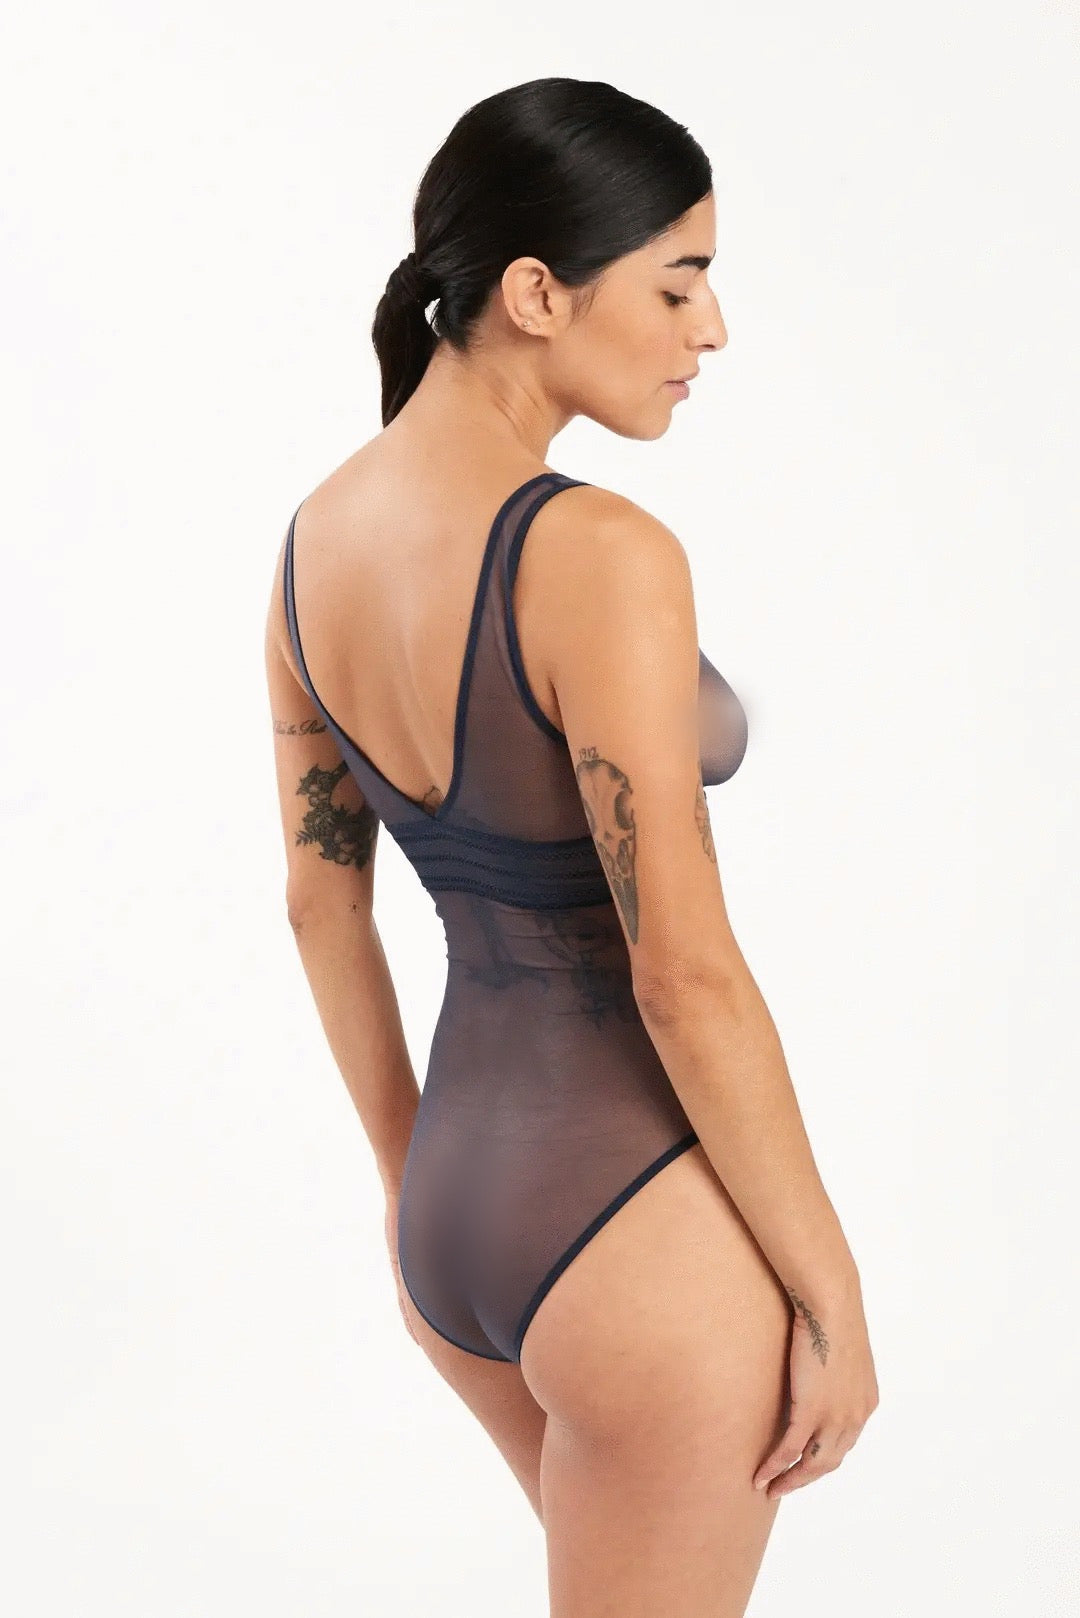 Lise Charmel Bare Soft Cup Bodysuit in midnight, available at LaSource in Darien